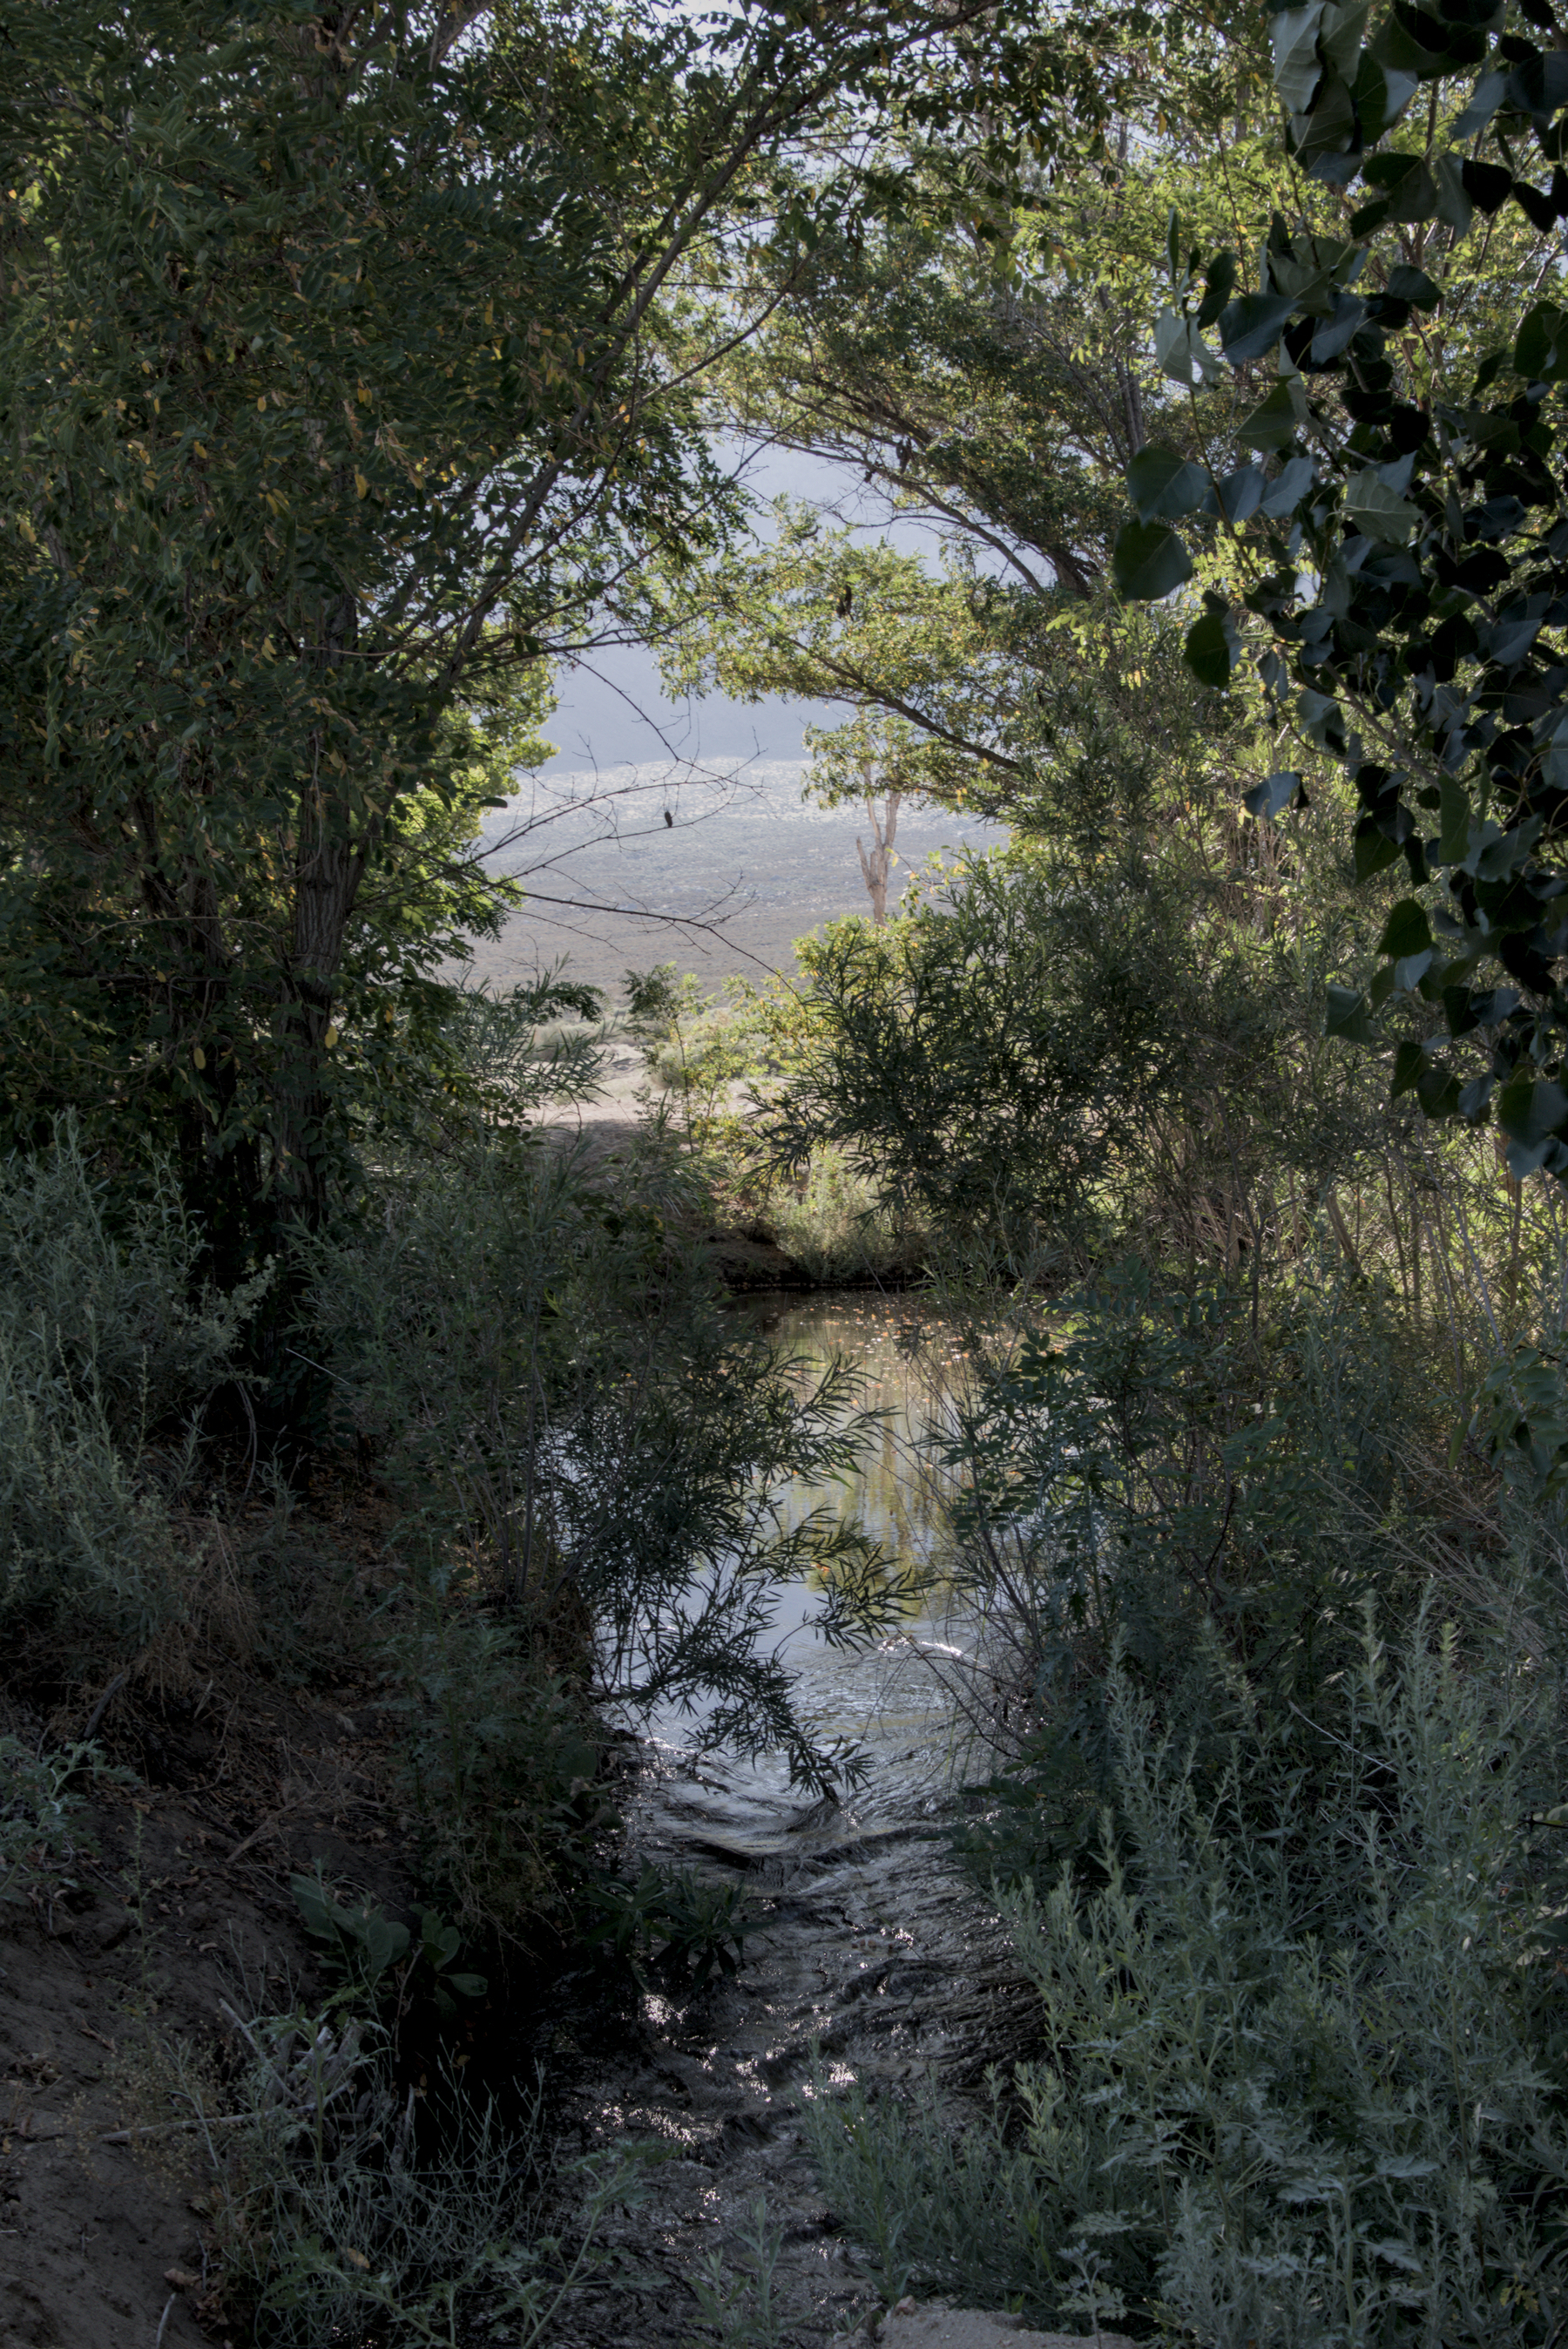 A gap in the trees gives a glimpse of a full stream, with high desert and mountains glimpsed in the background.